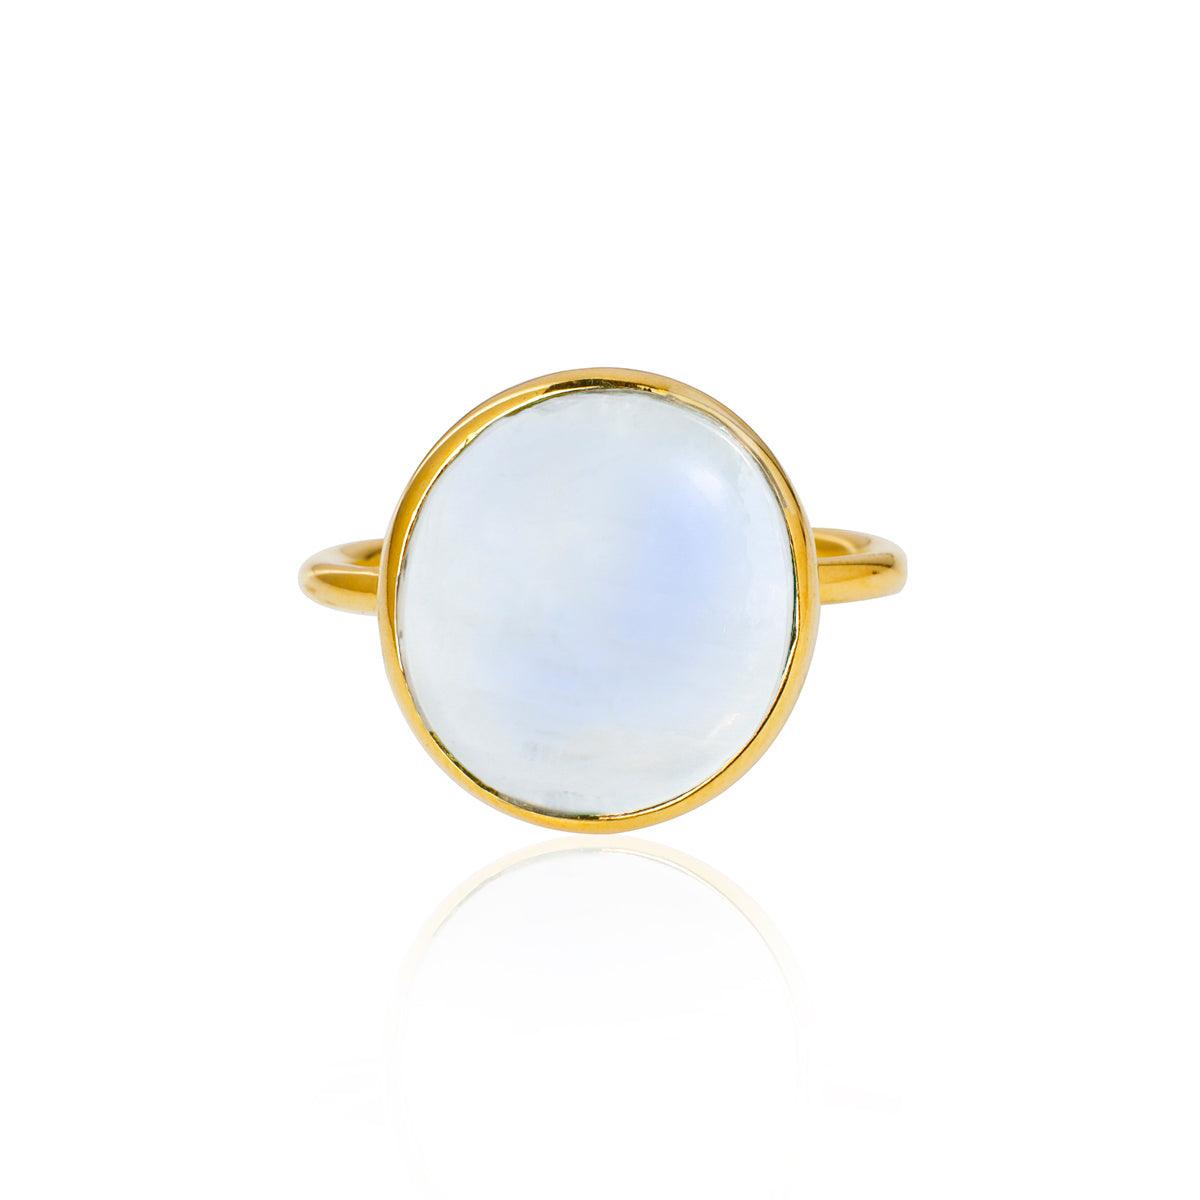 Moonstone Solitaire Ring 14k Gold Over 925 Silver - YoTreasure